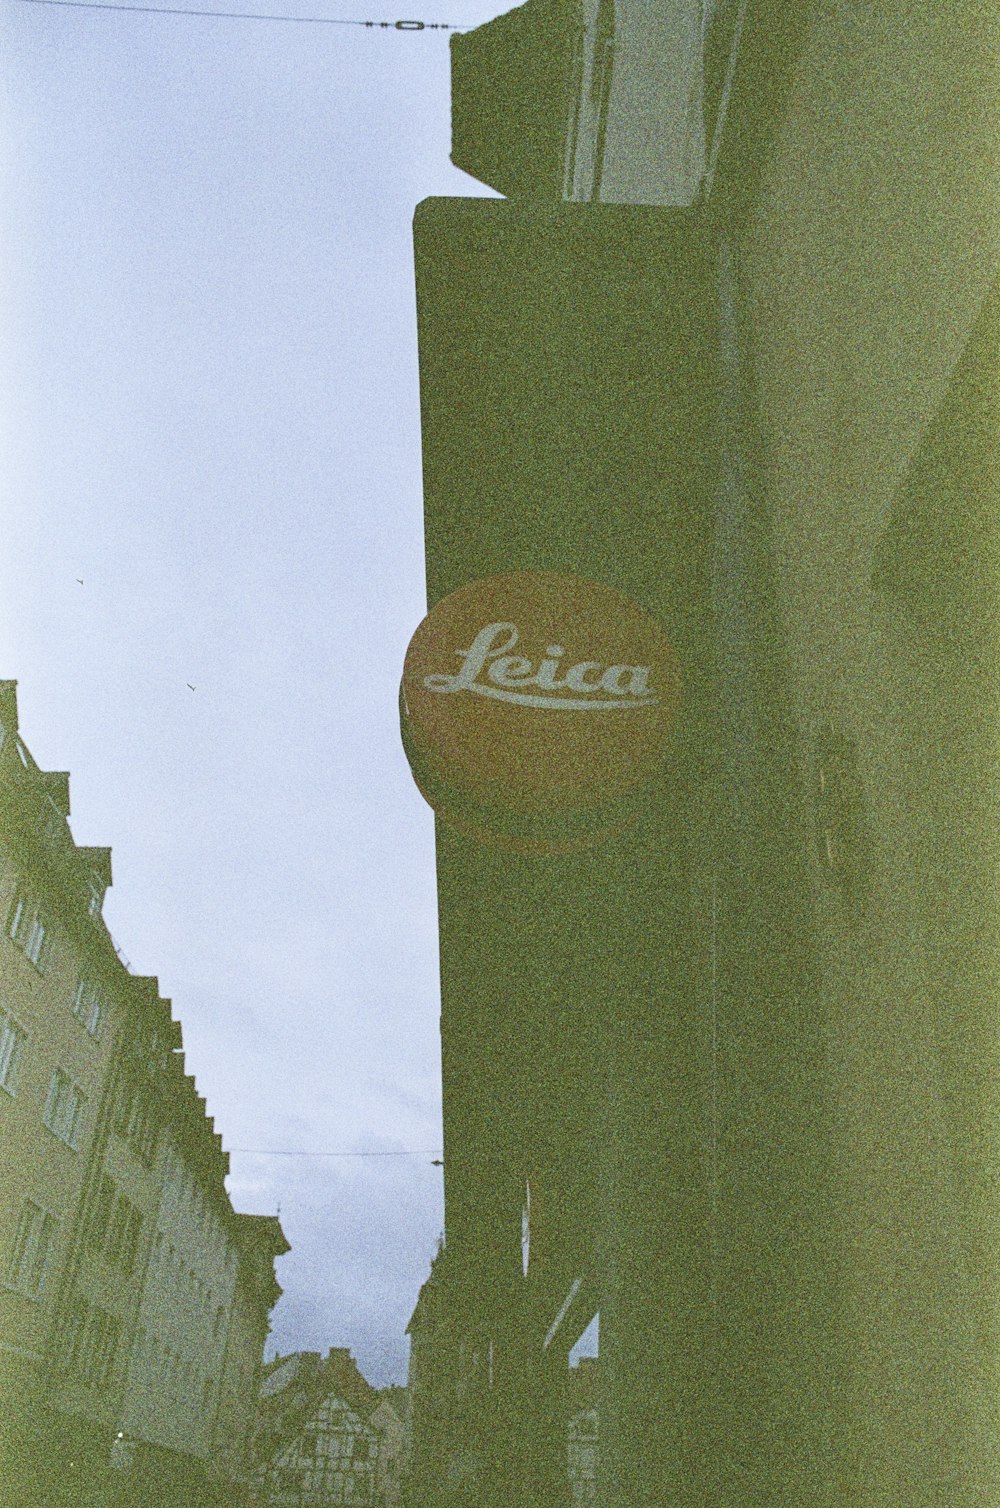 a leica sign on the side of a building